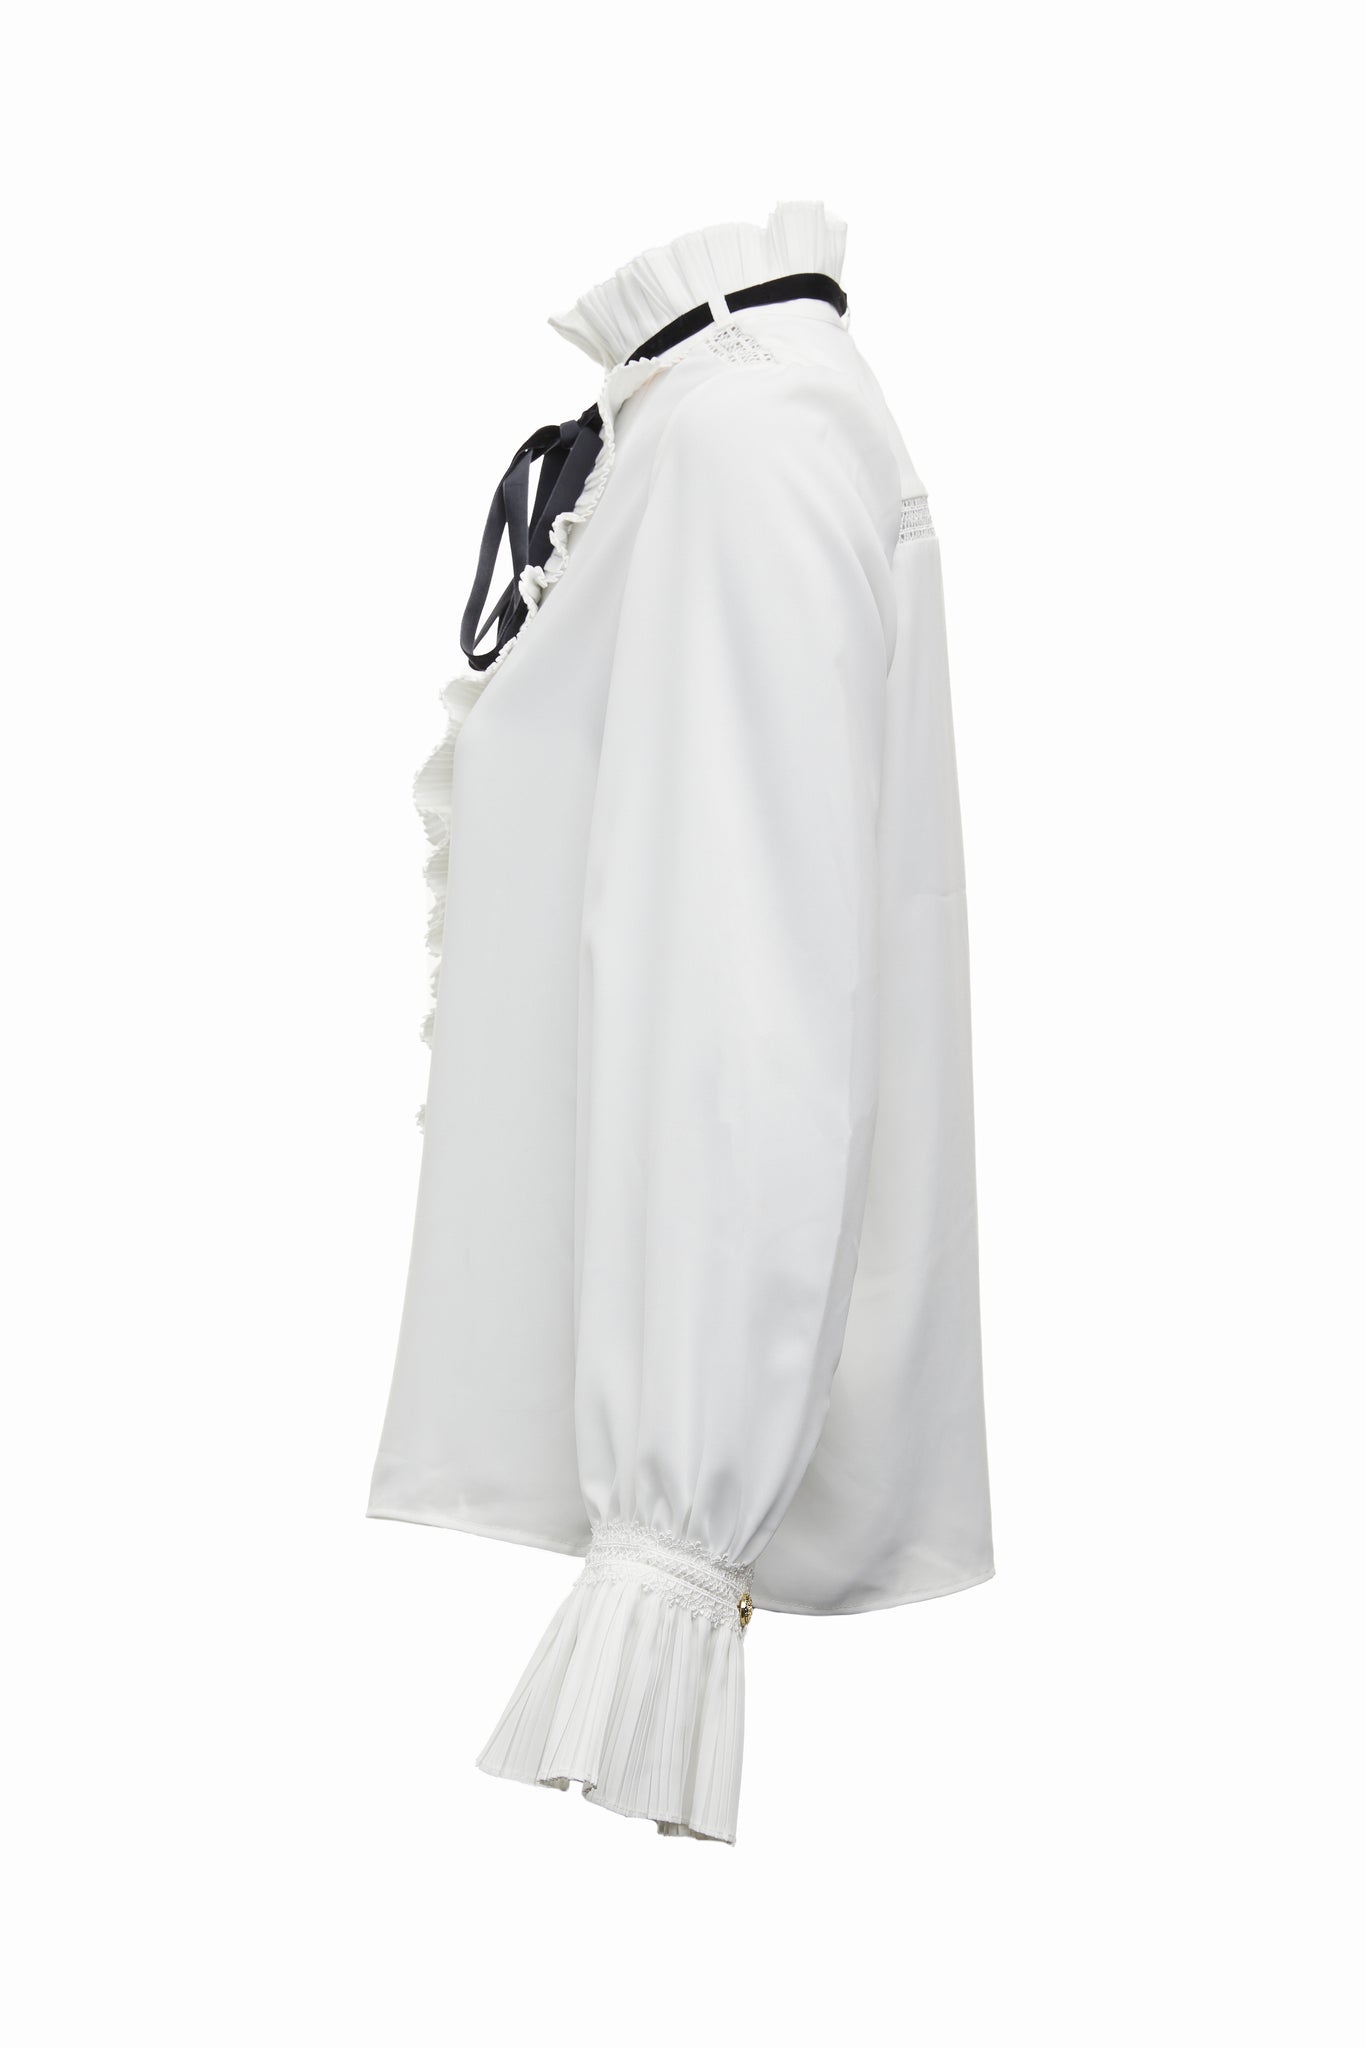 side image of womens relaxed fit white polyester shirt with ruffled front collar and cuffs and removable black tie detail